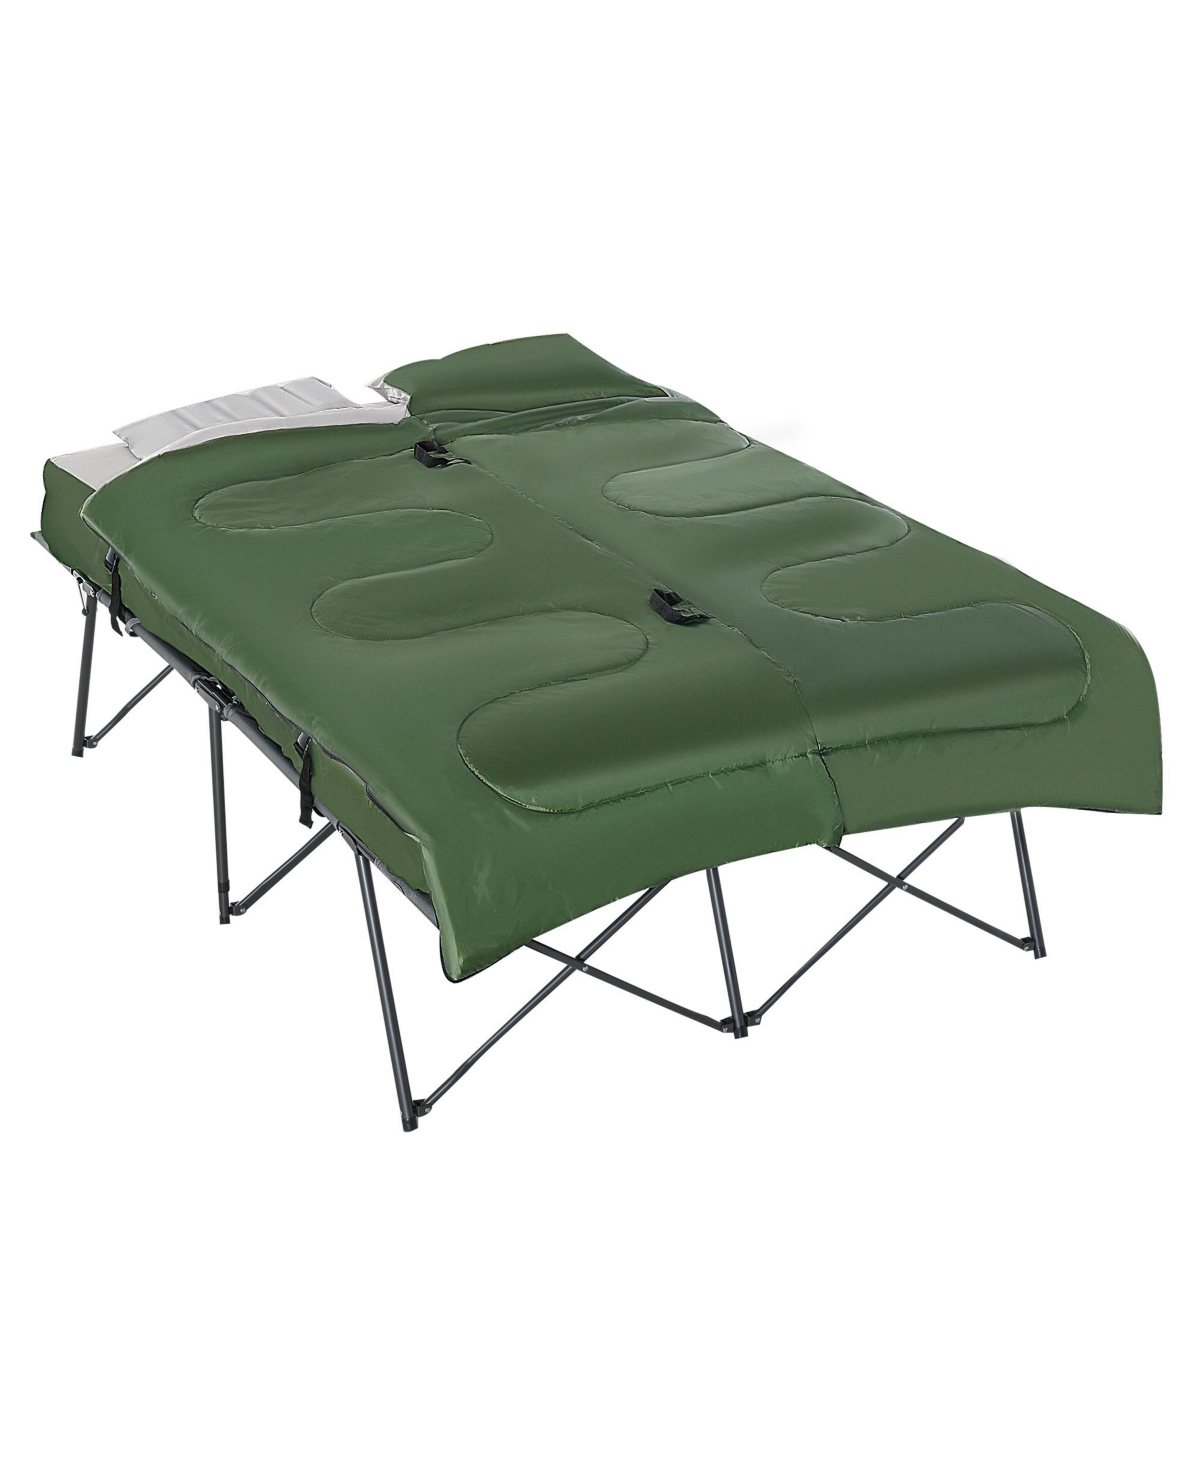 2-Person Folding Camping Cot Portable Outdoor Bed Set with Sleeping Bag, Inflatable Air Mattress, Comfort Pillows and Carry Bag, Soft and Com